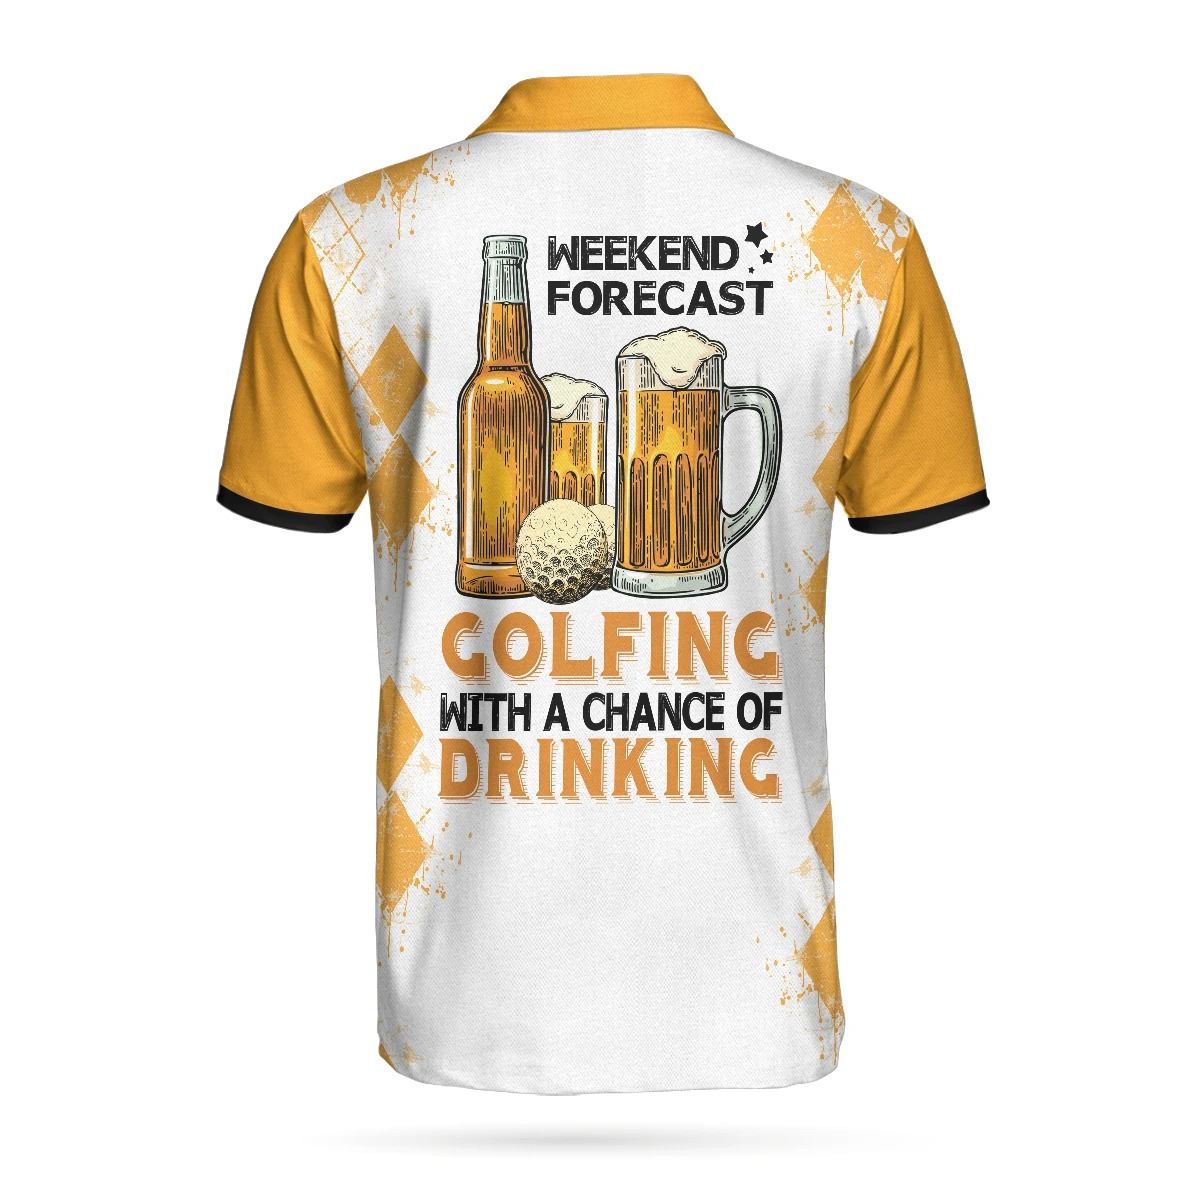 Skeleton weekend forecast colfing with a chance of dringking polo shirt3